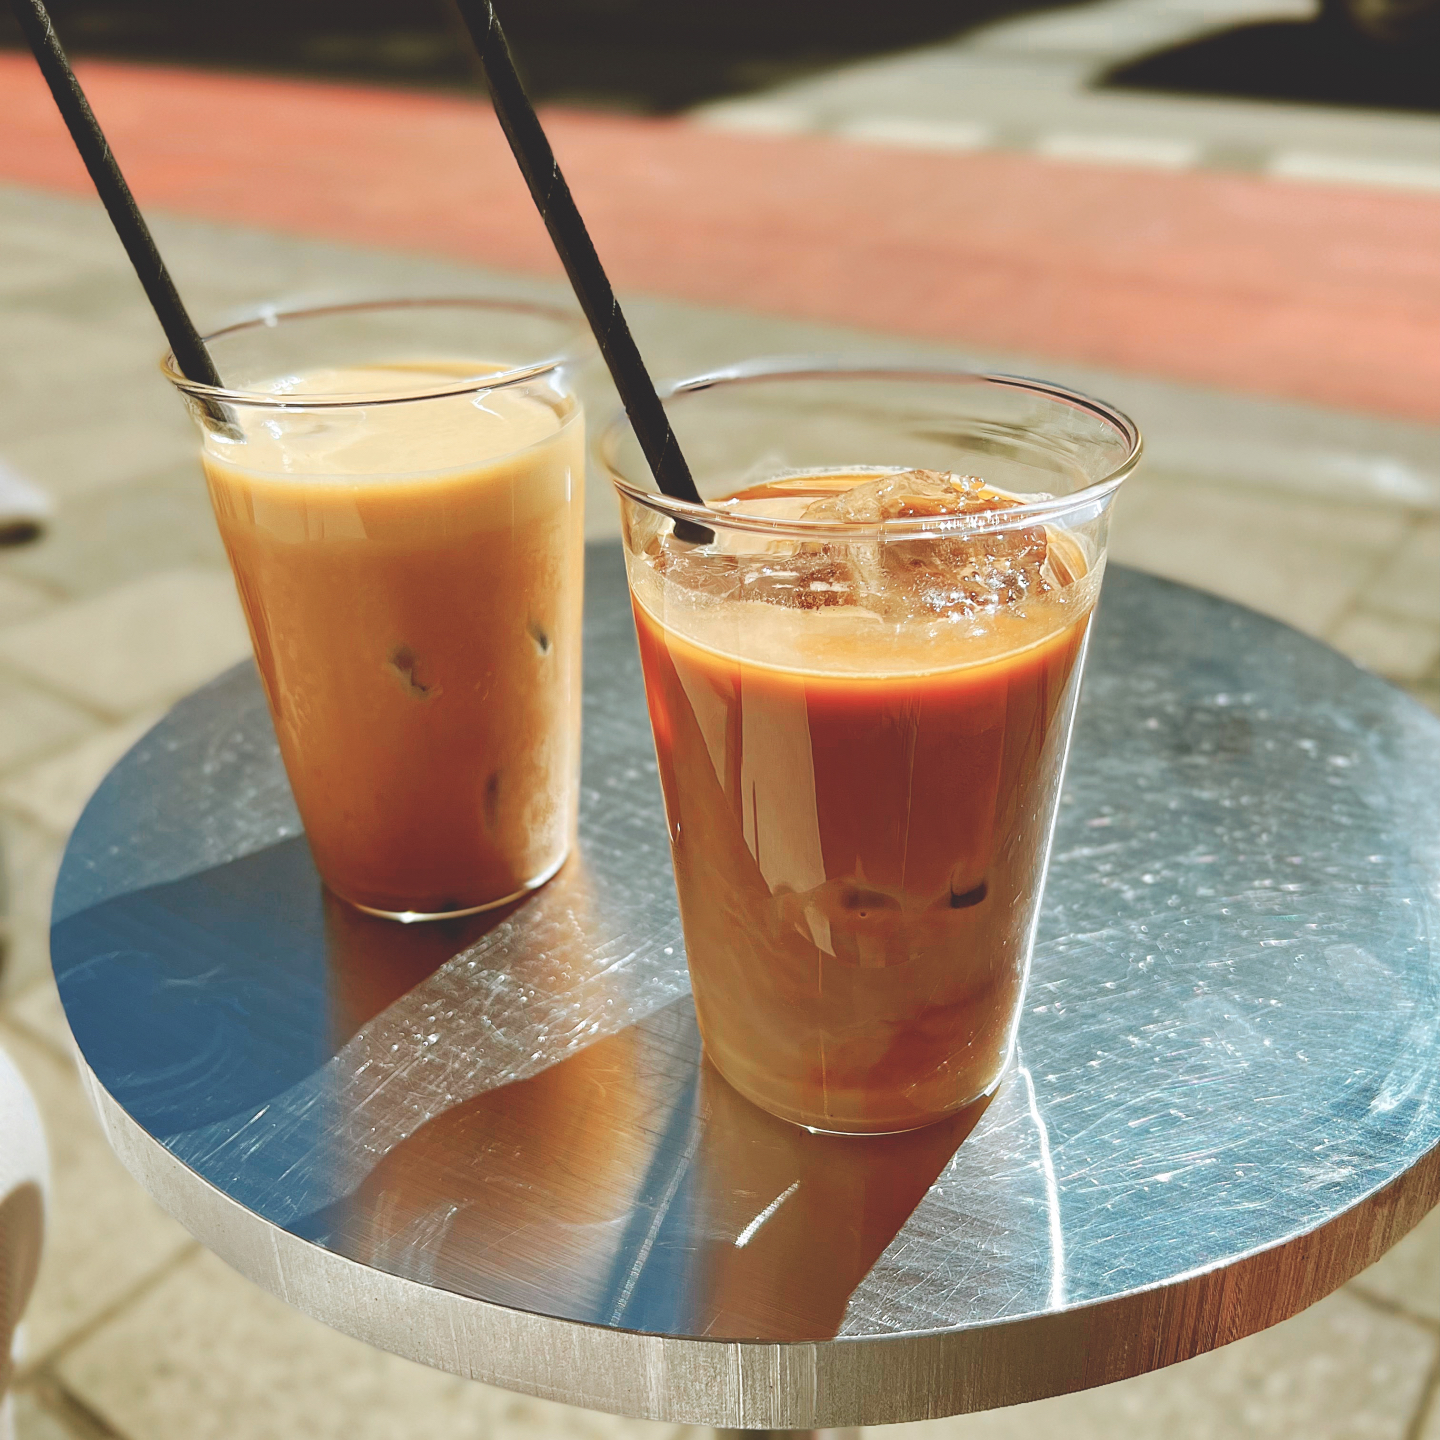 Iced Coffee Muenchen Orno Cafe